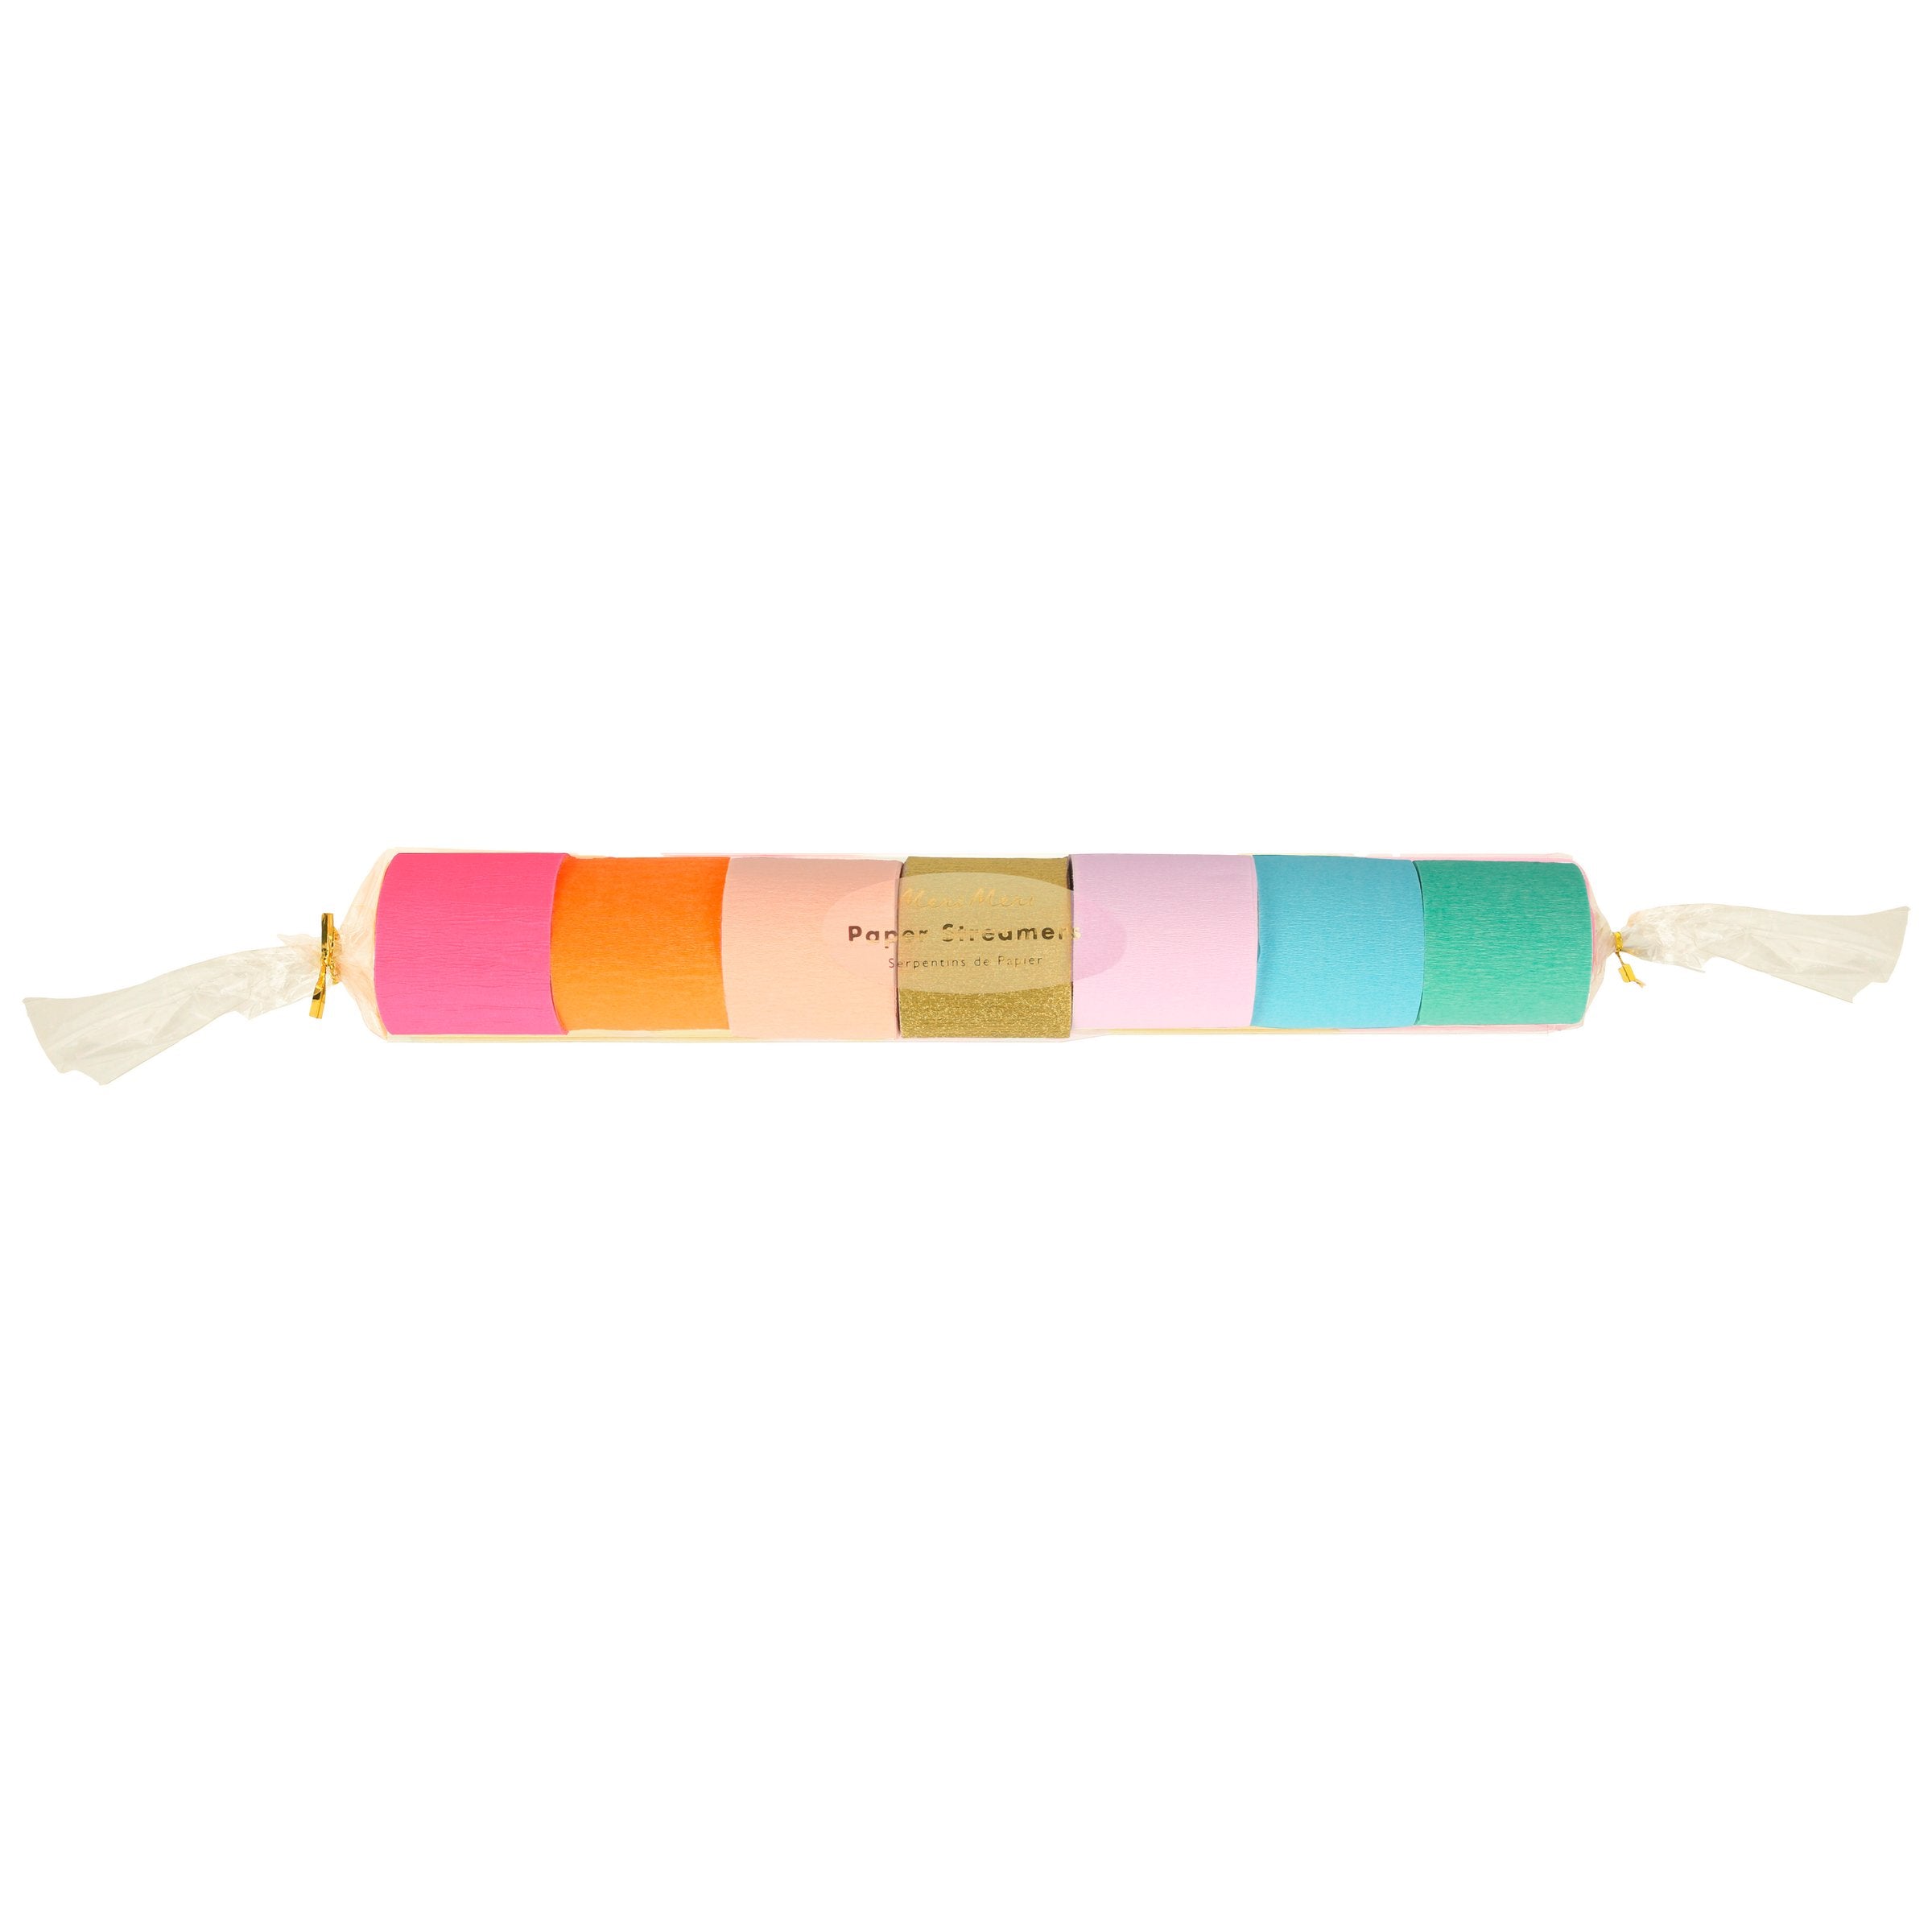 Our streamers are crafted from crepe paper in neon and gold, perfect for paper party decorations.